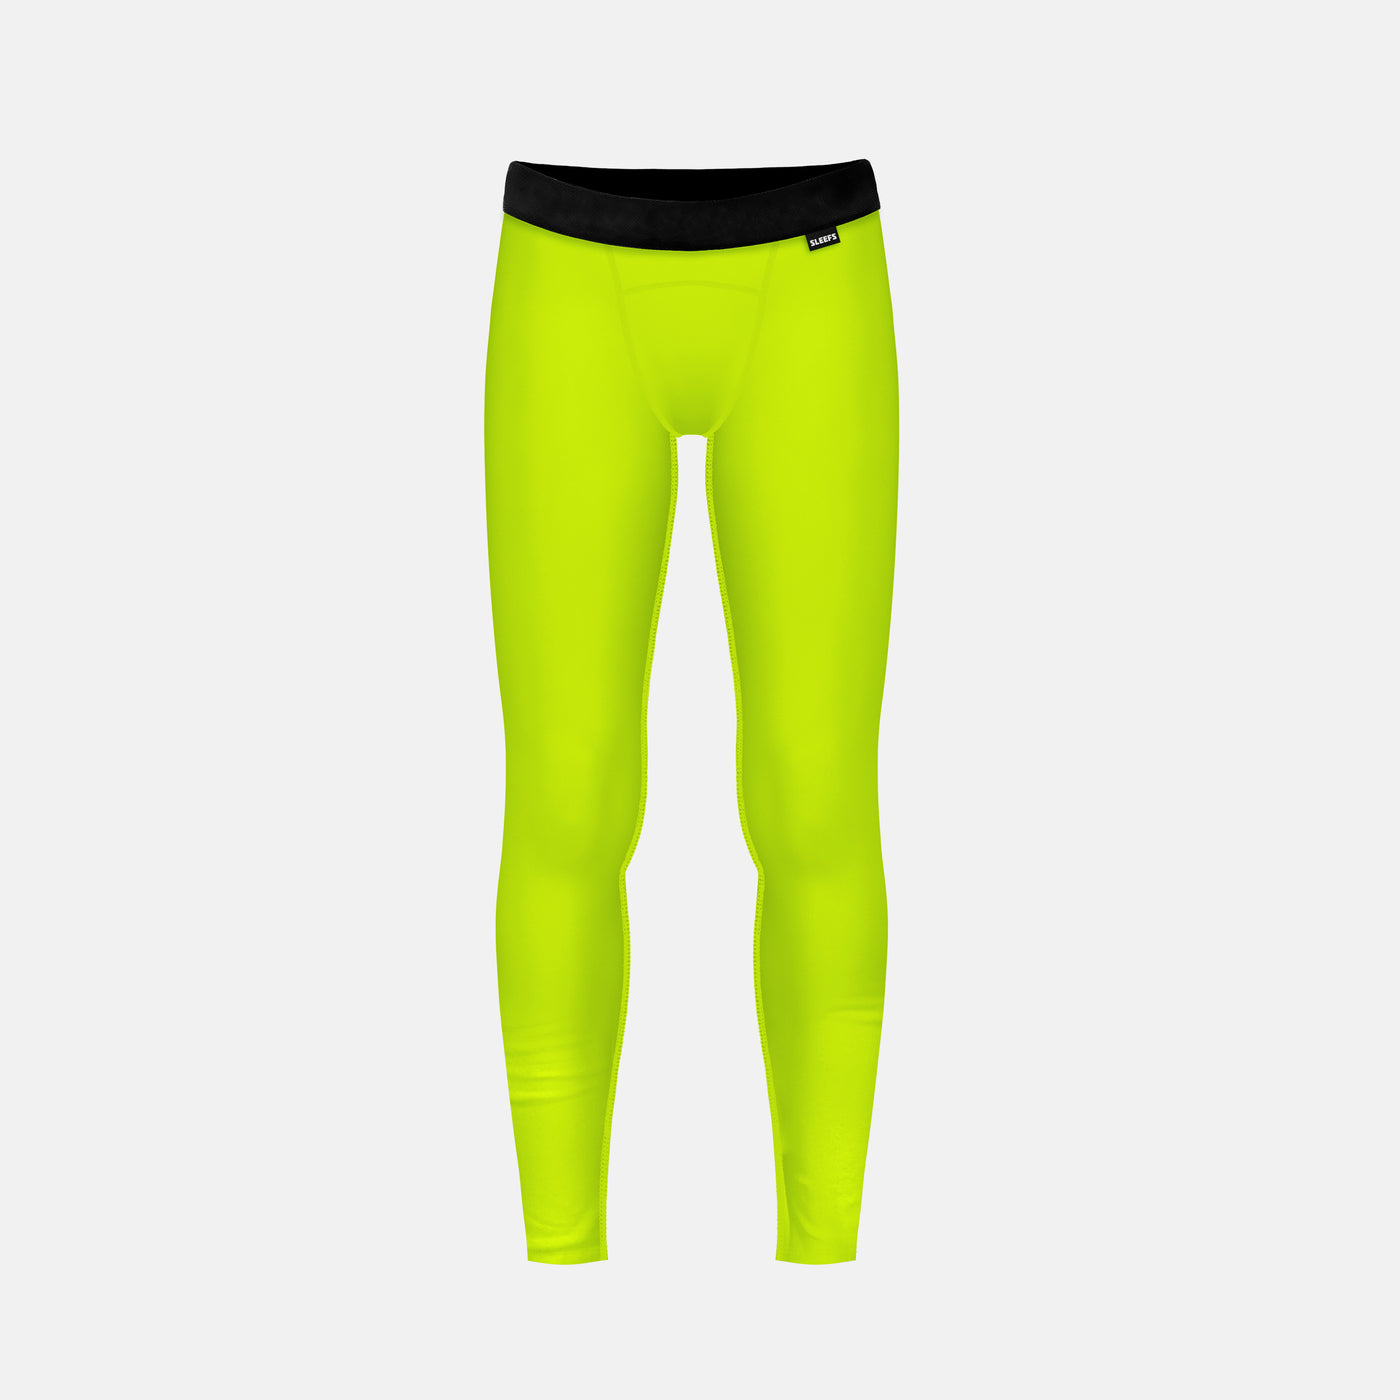 Safety Yellow Tights for Kids